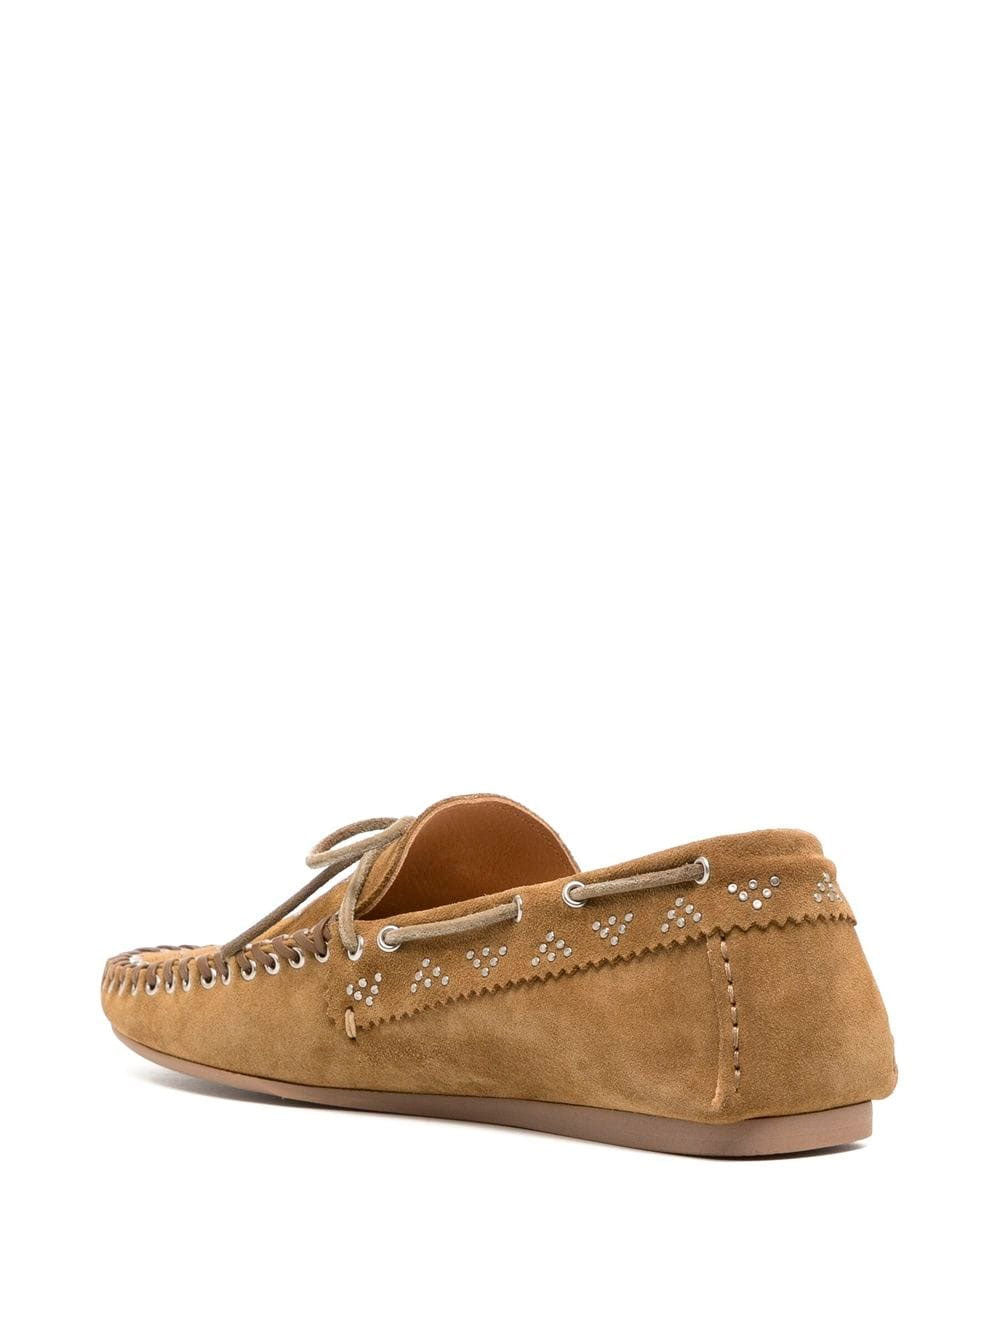 Freen suede loafers